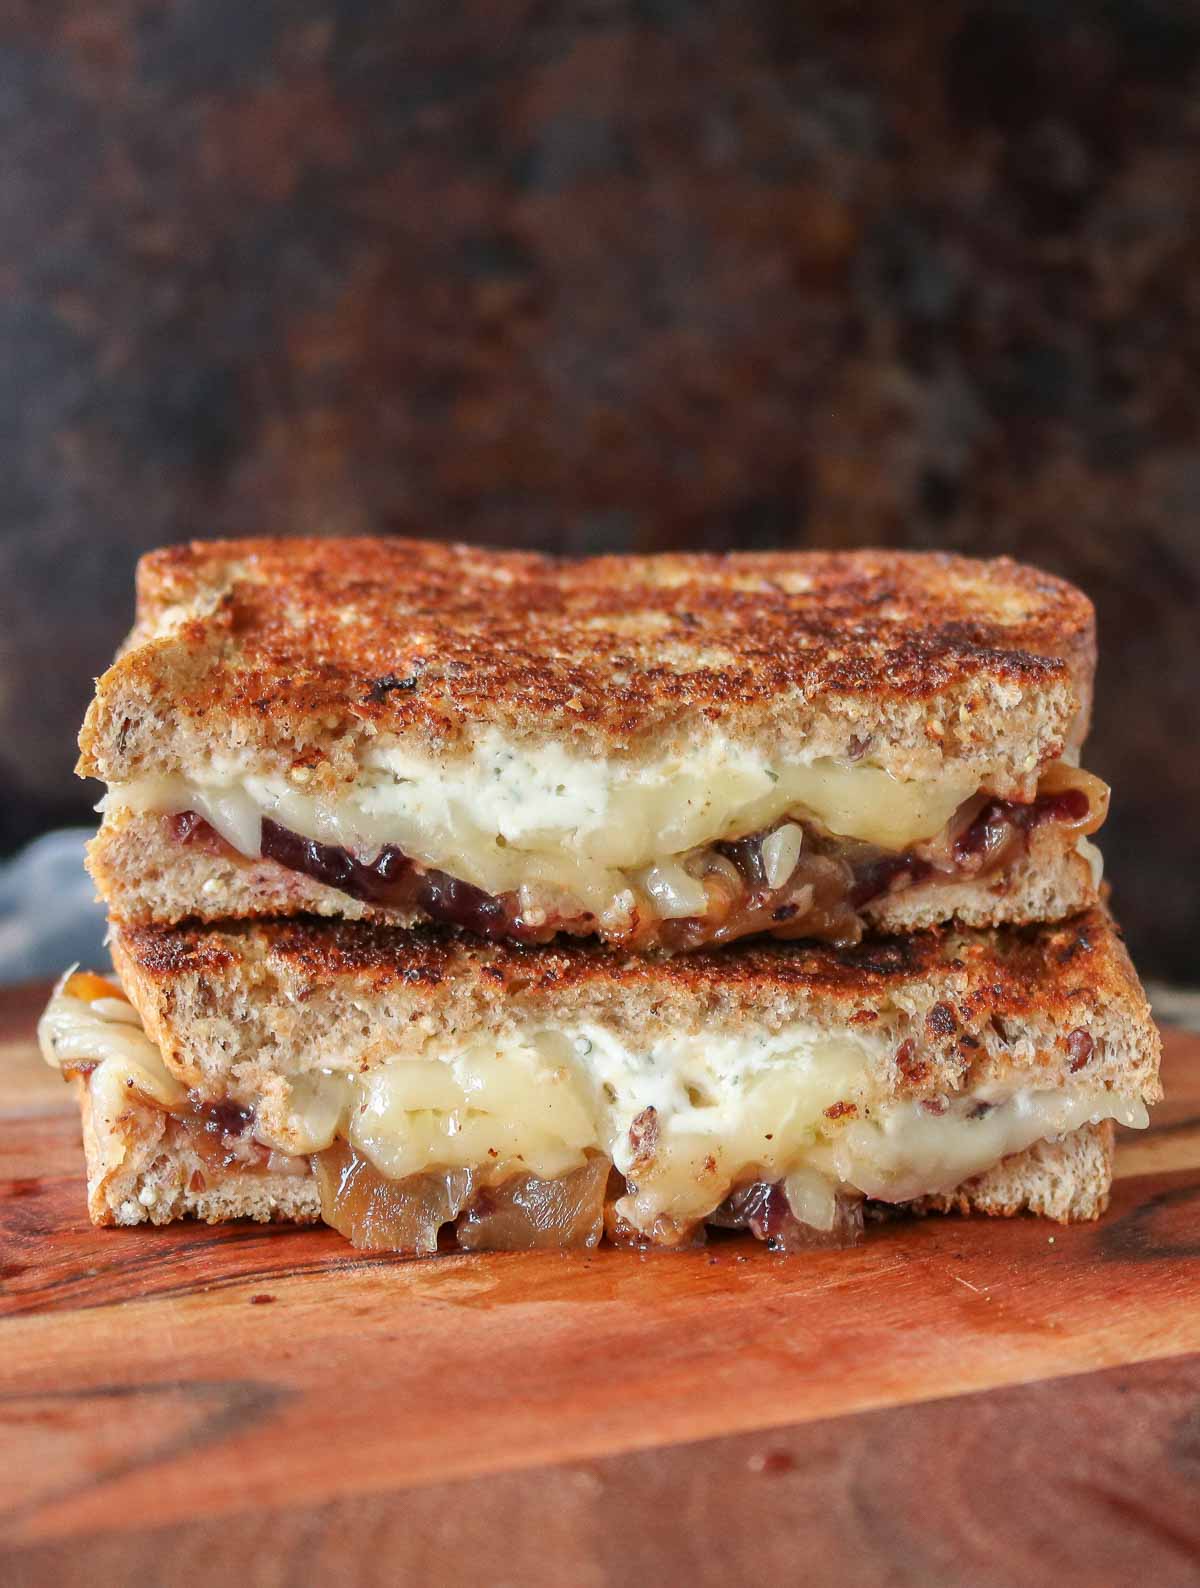 Two halves of a caramelized onion grilled cheese sandwich stacked on a wooden serving board.